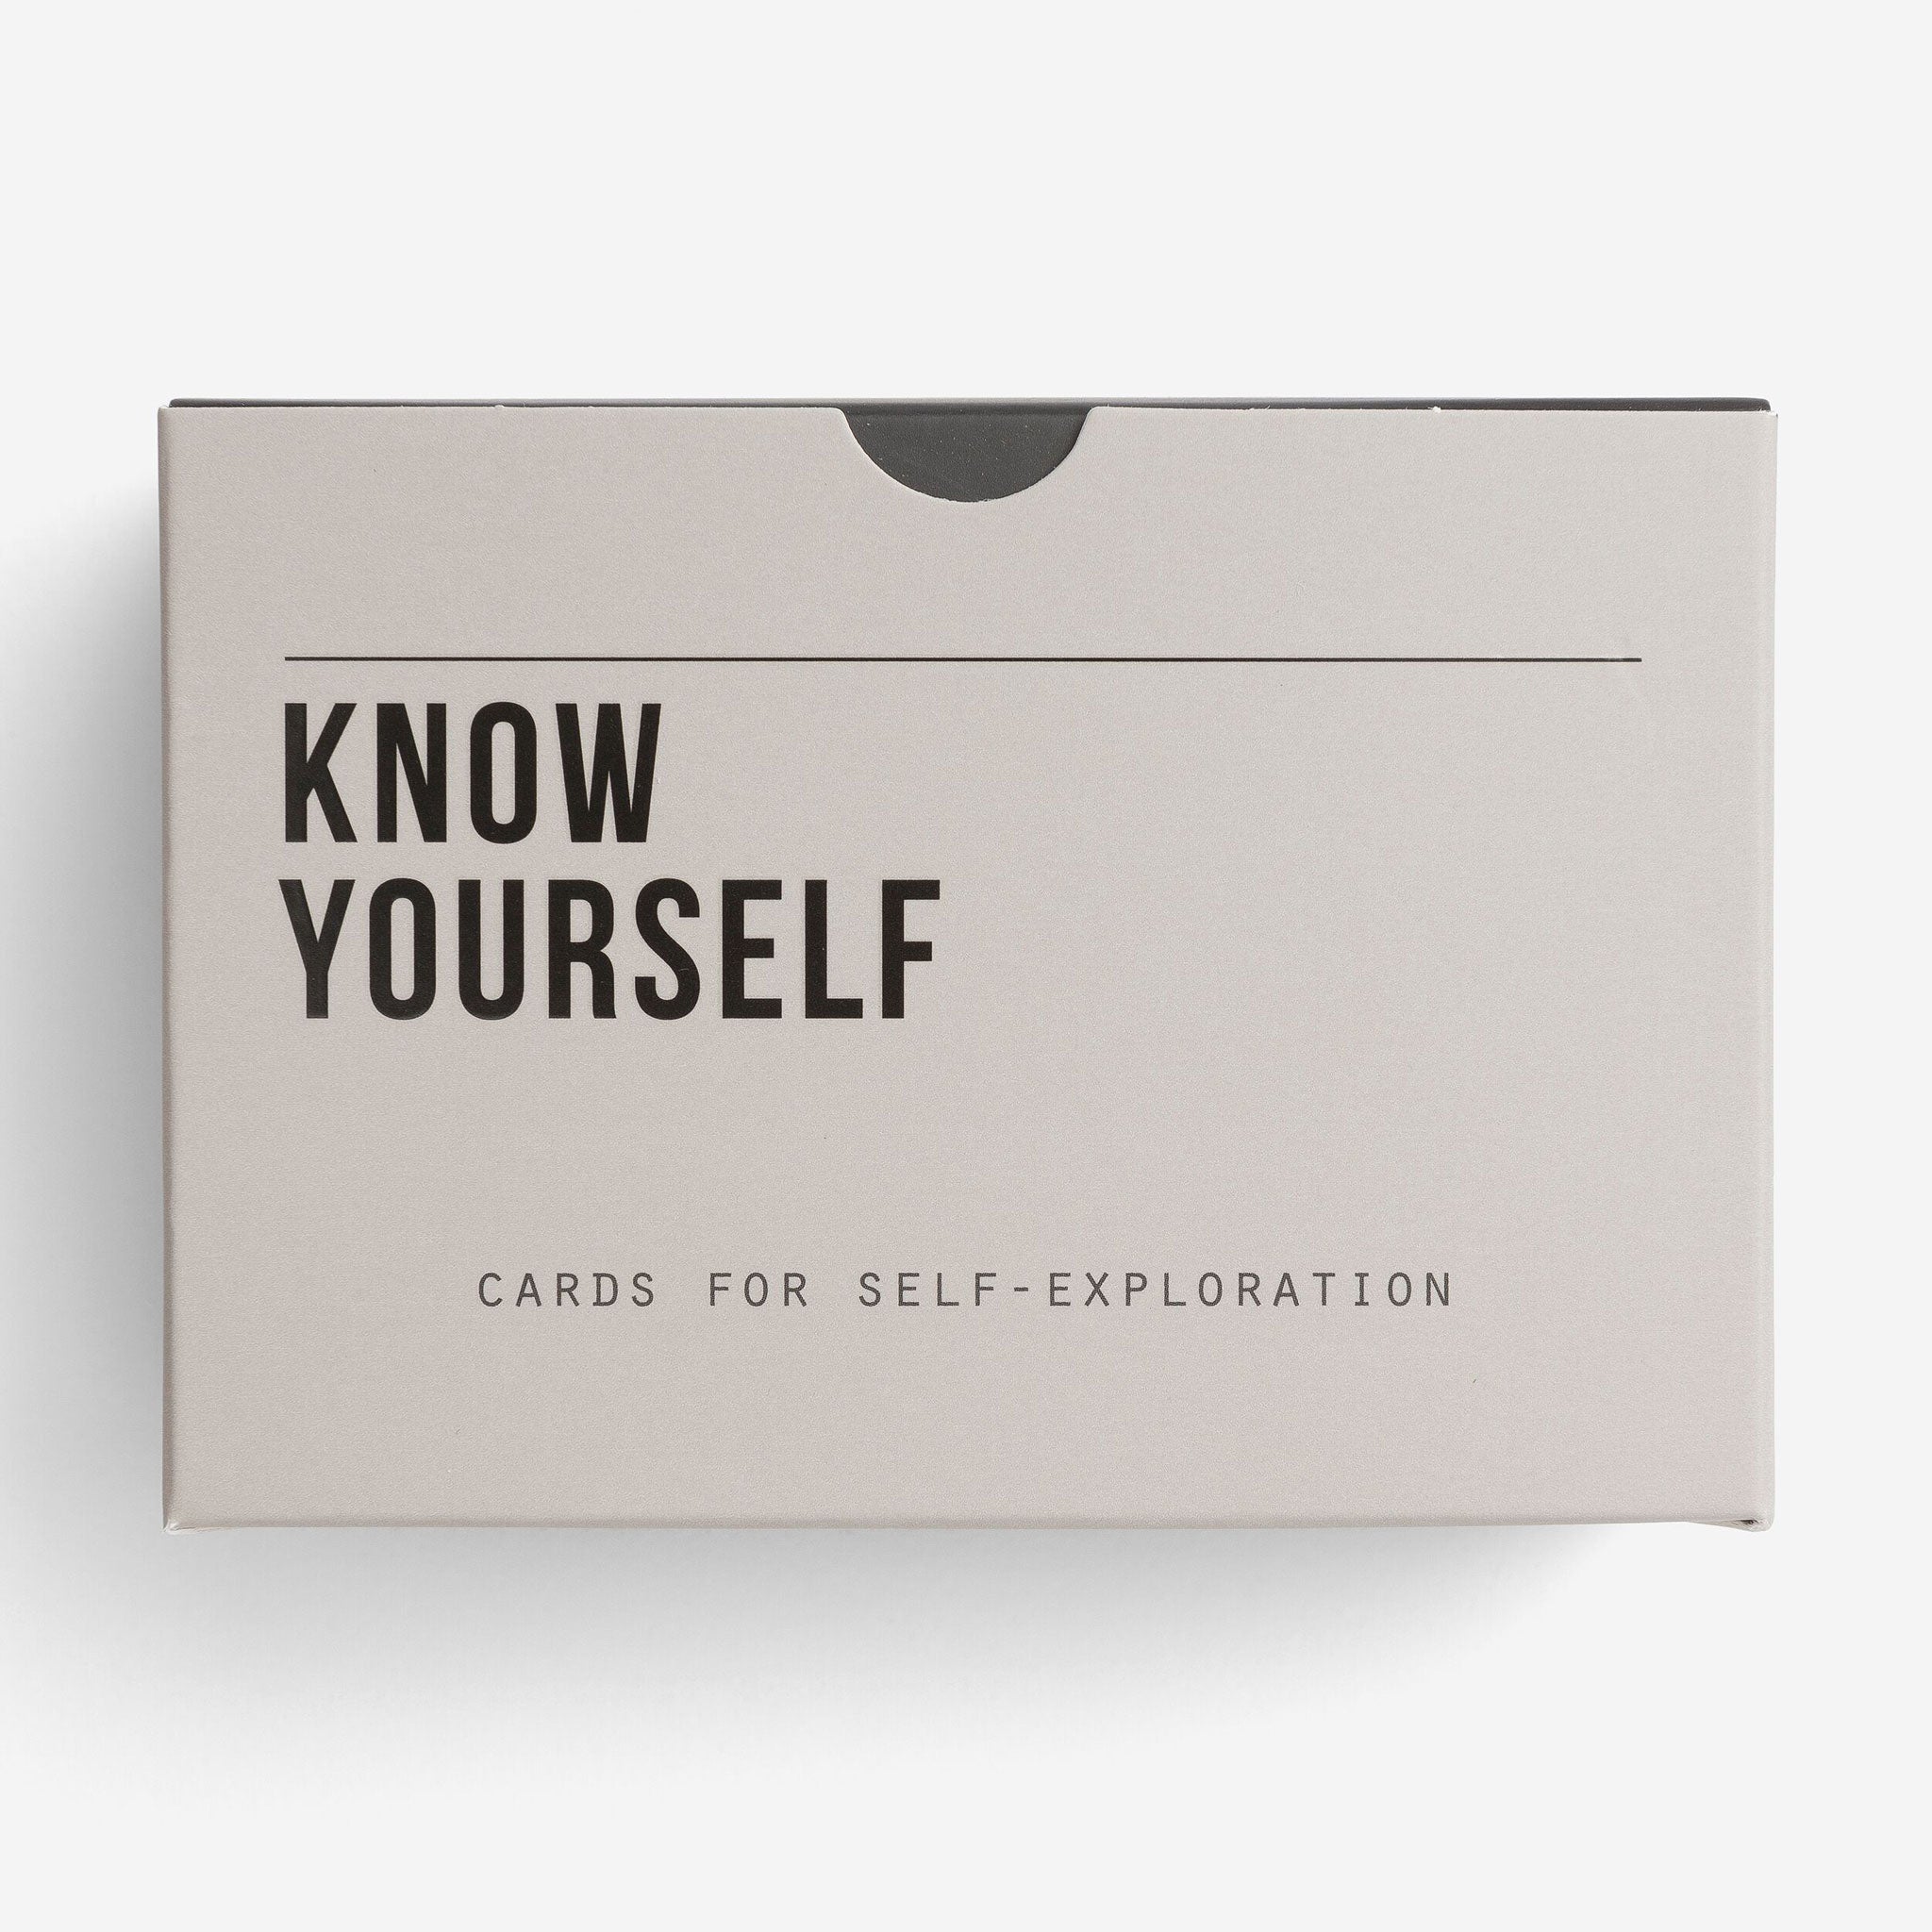 KNOW YOURSELF | KARTENSET | Englische Edition | The School of Life